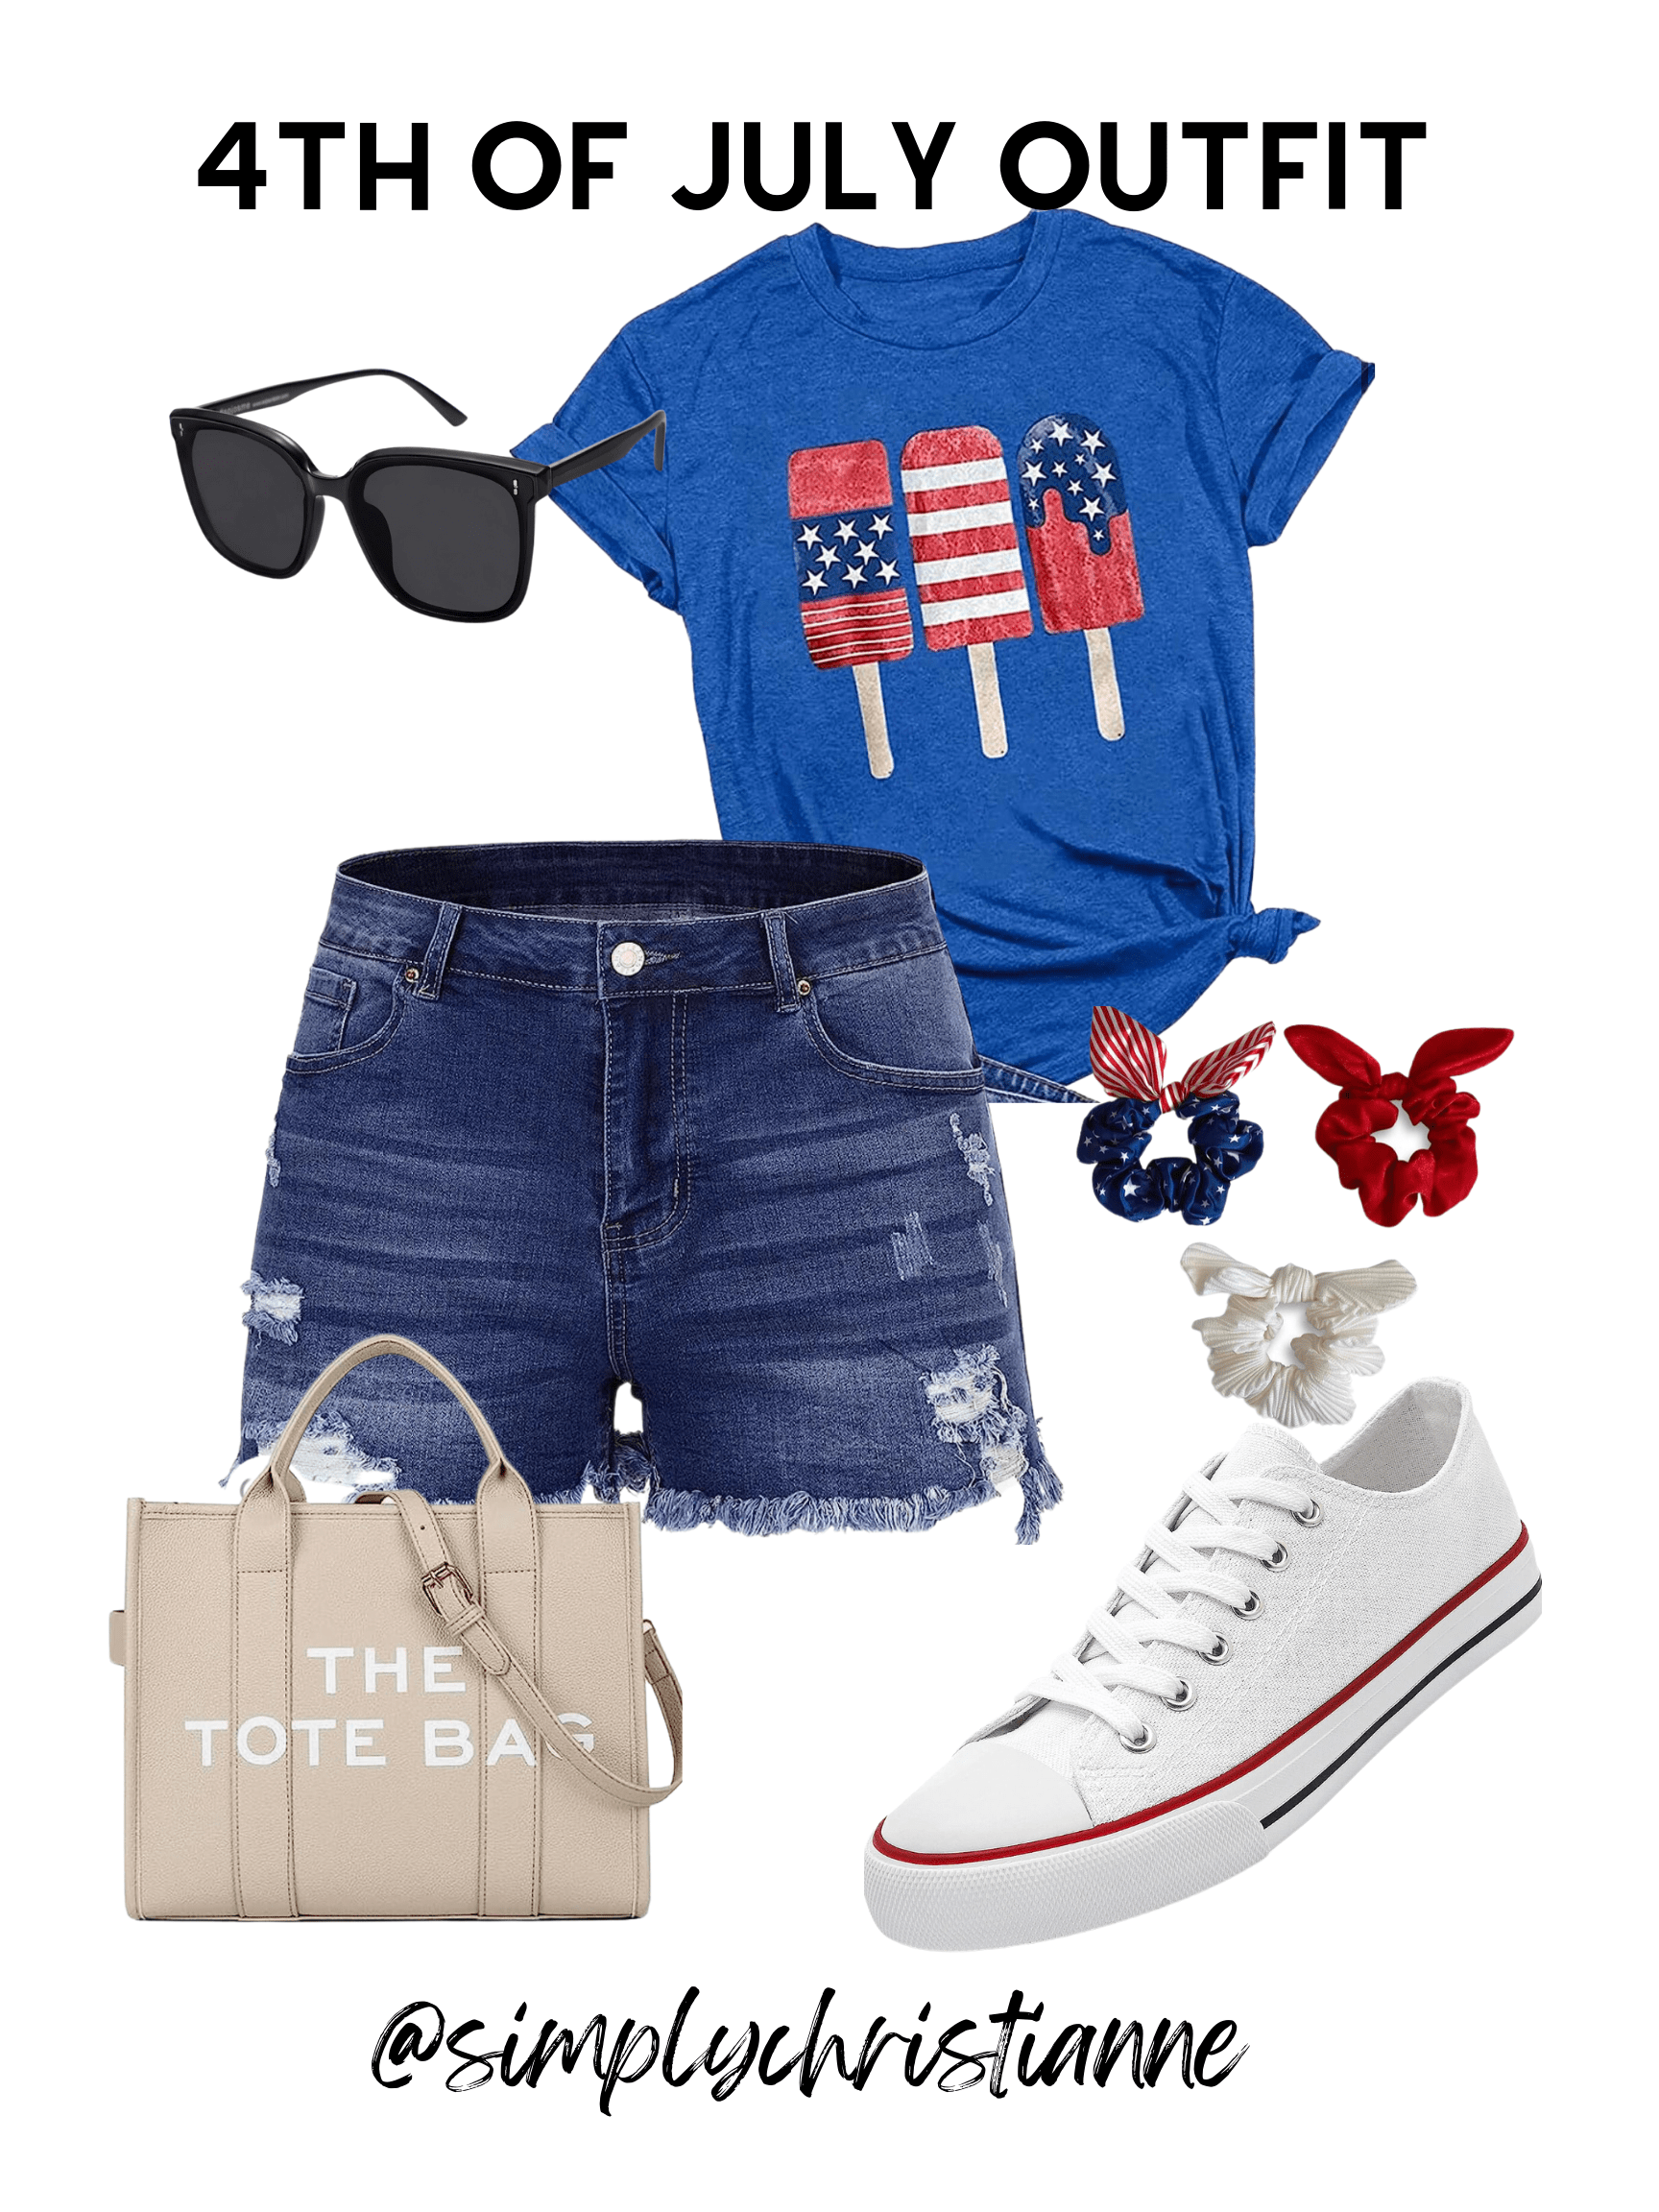  Show Your Patriotic Style: 4th of July Outfit Ideas